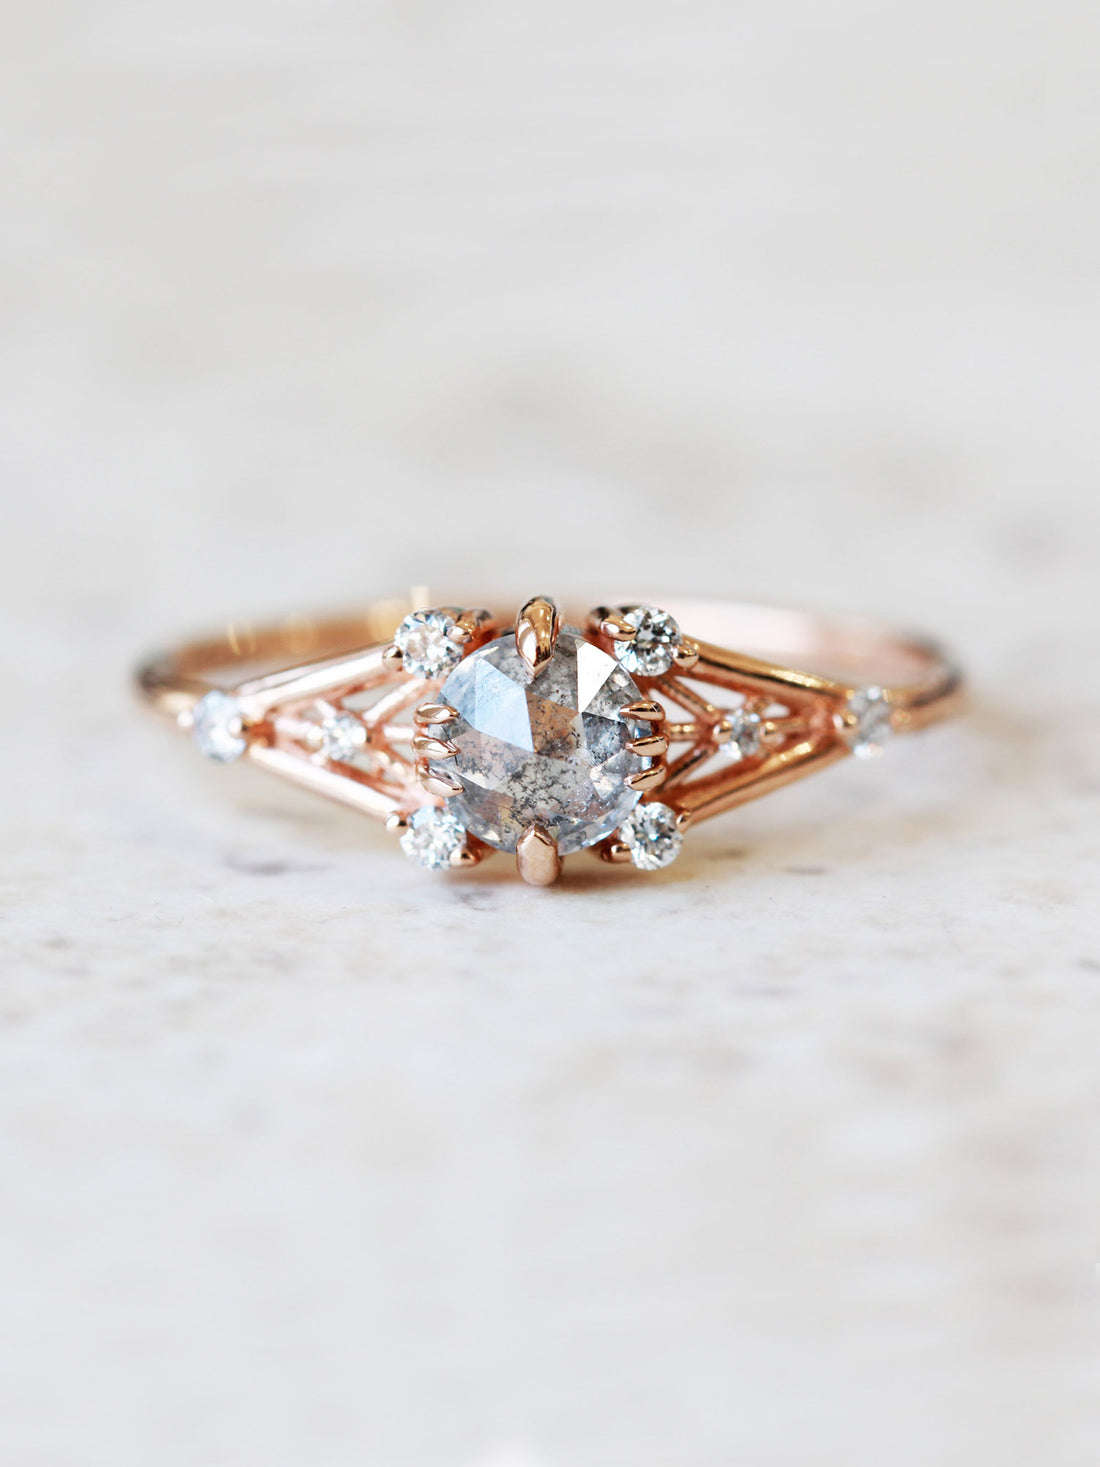 hiddenspace-engagement-rings-round-star-salt-and-pepper-diamond-14k-front